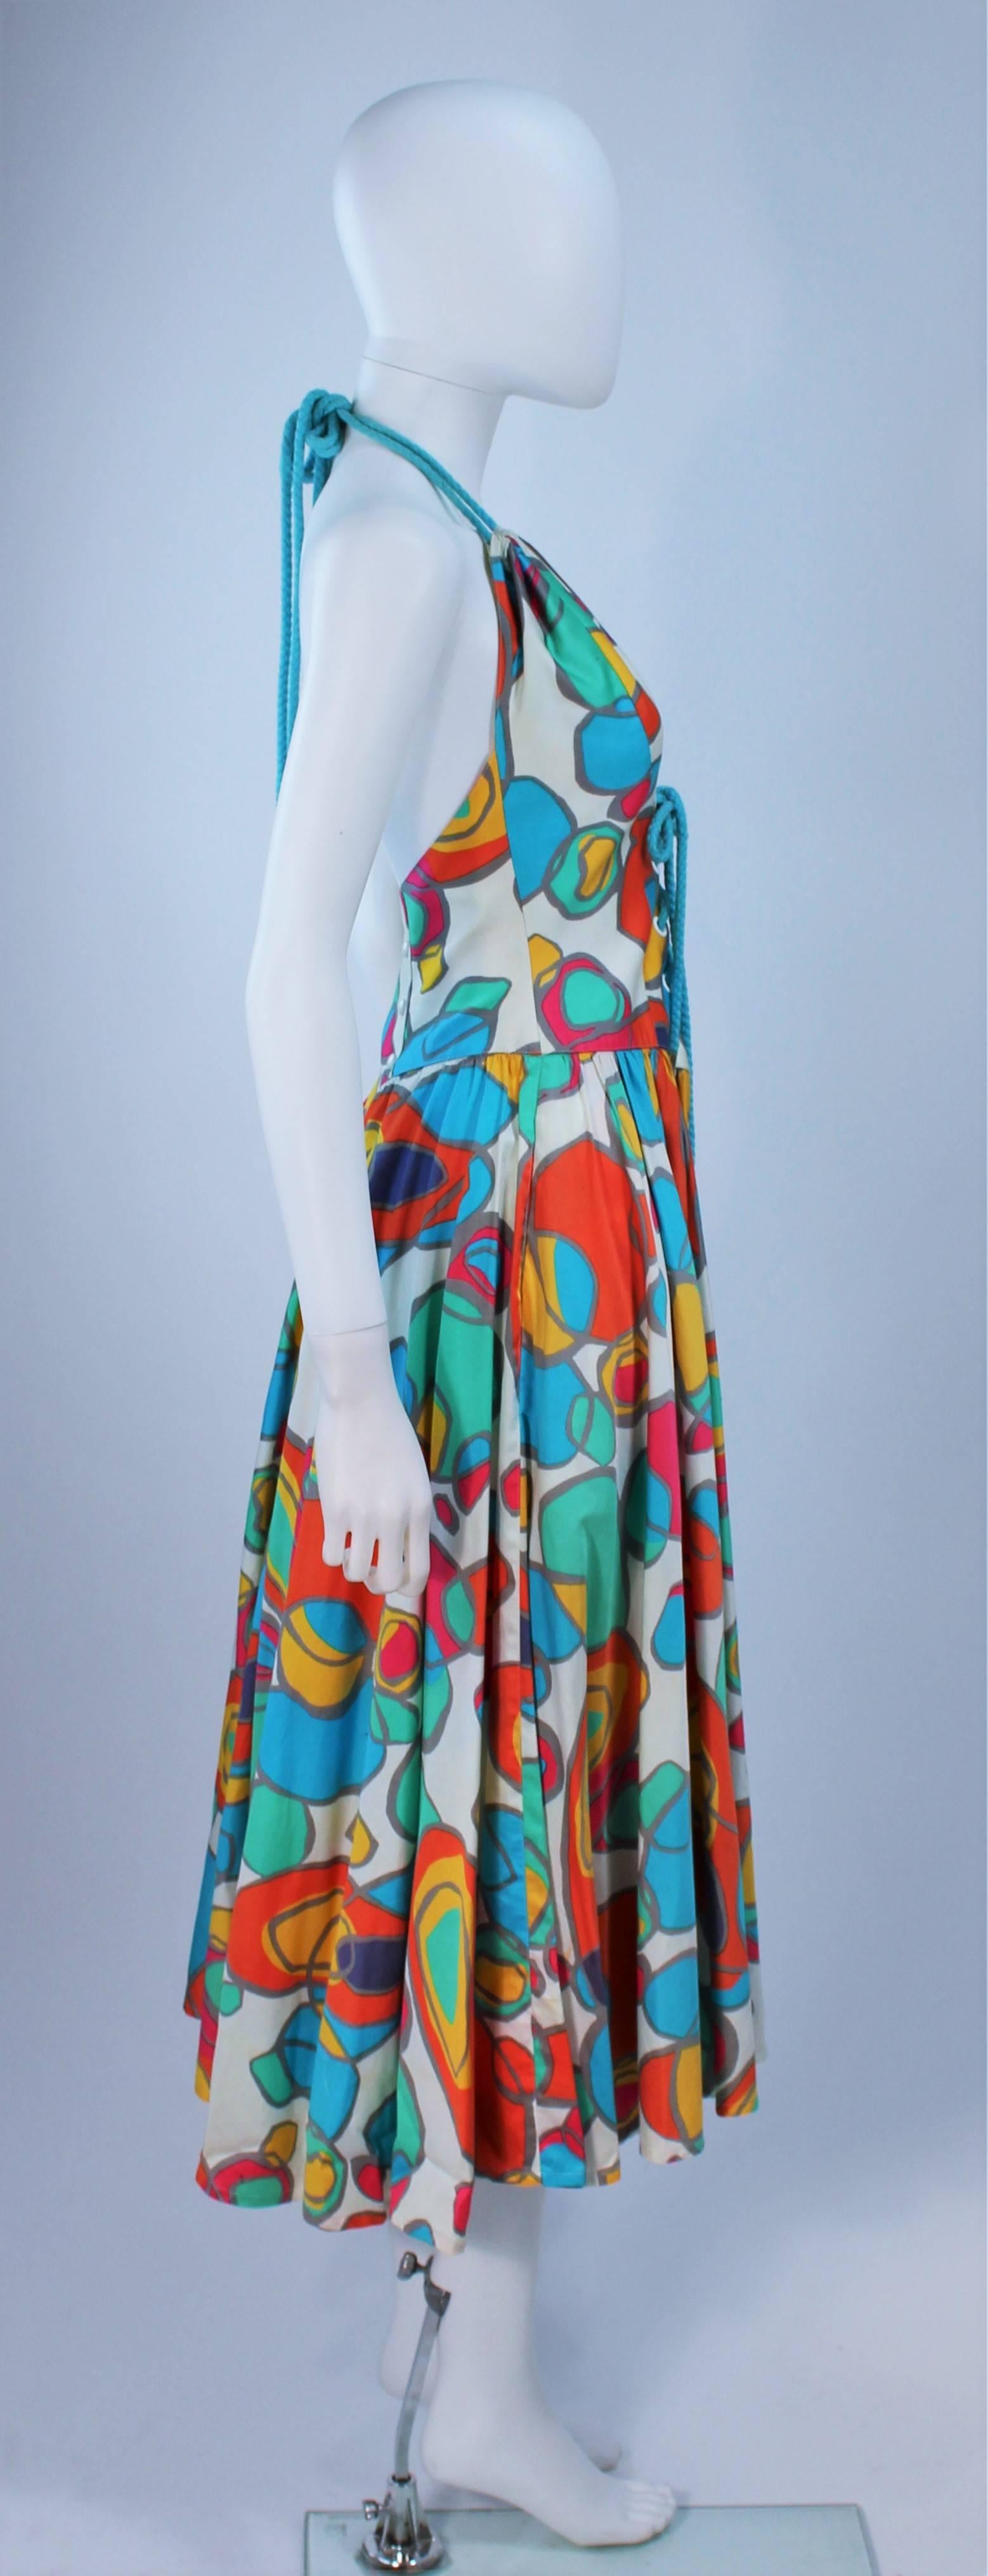 THIERRY MUGLER Printed Halter Dress Size 32 In Excellent Condition For Sale In Los Angeles, CA